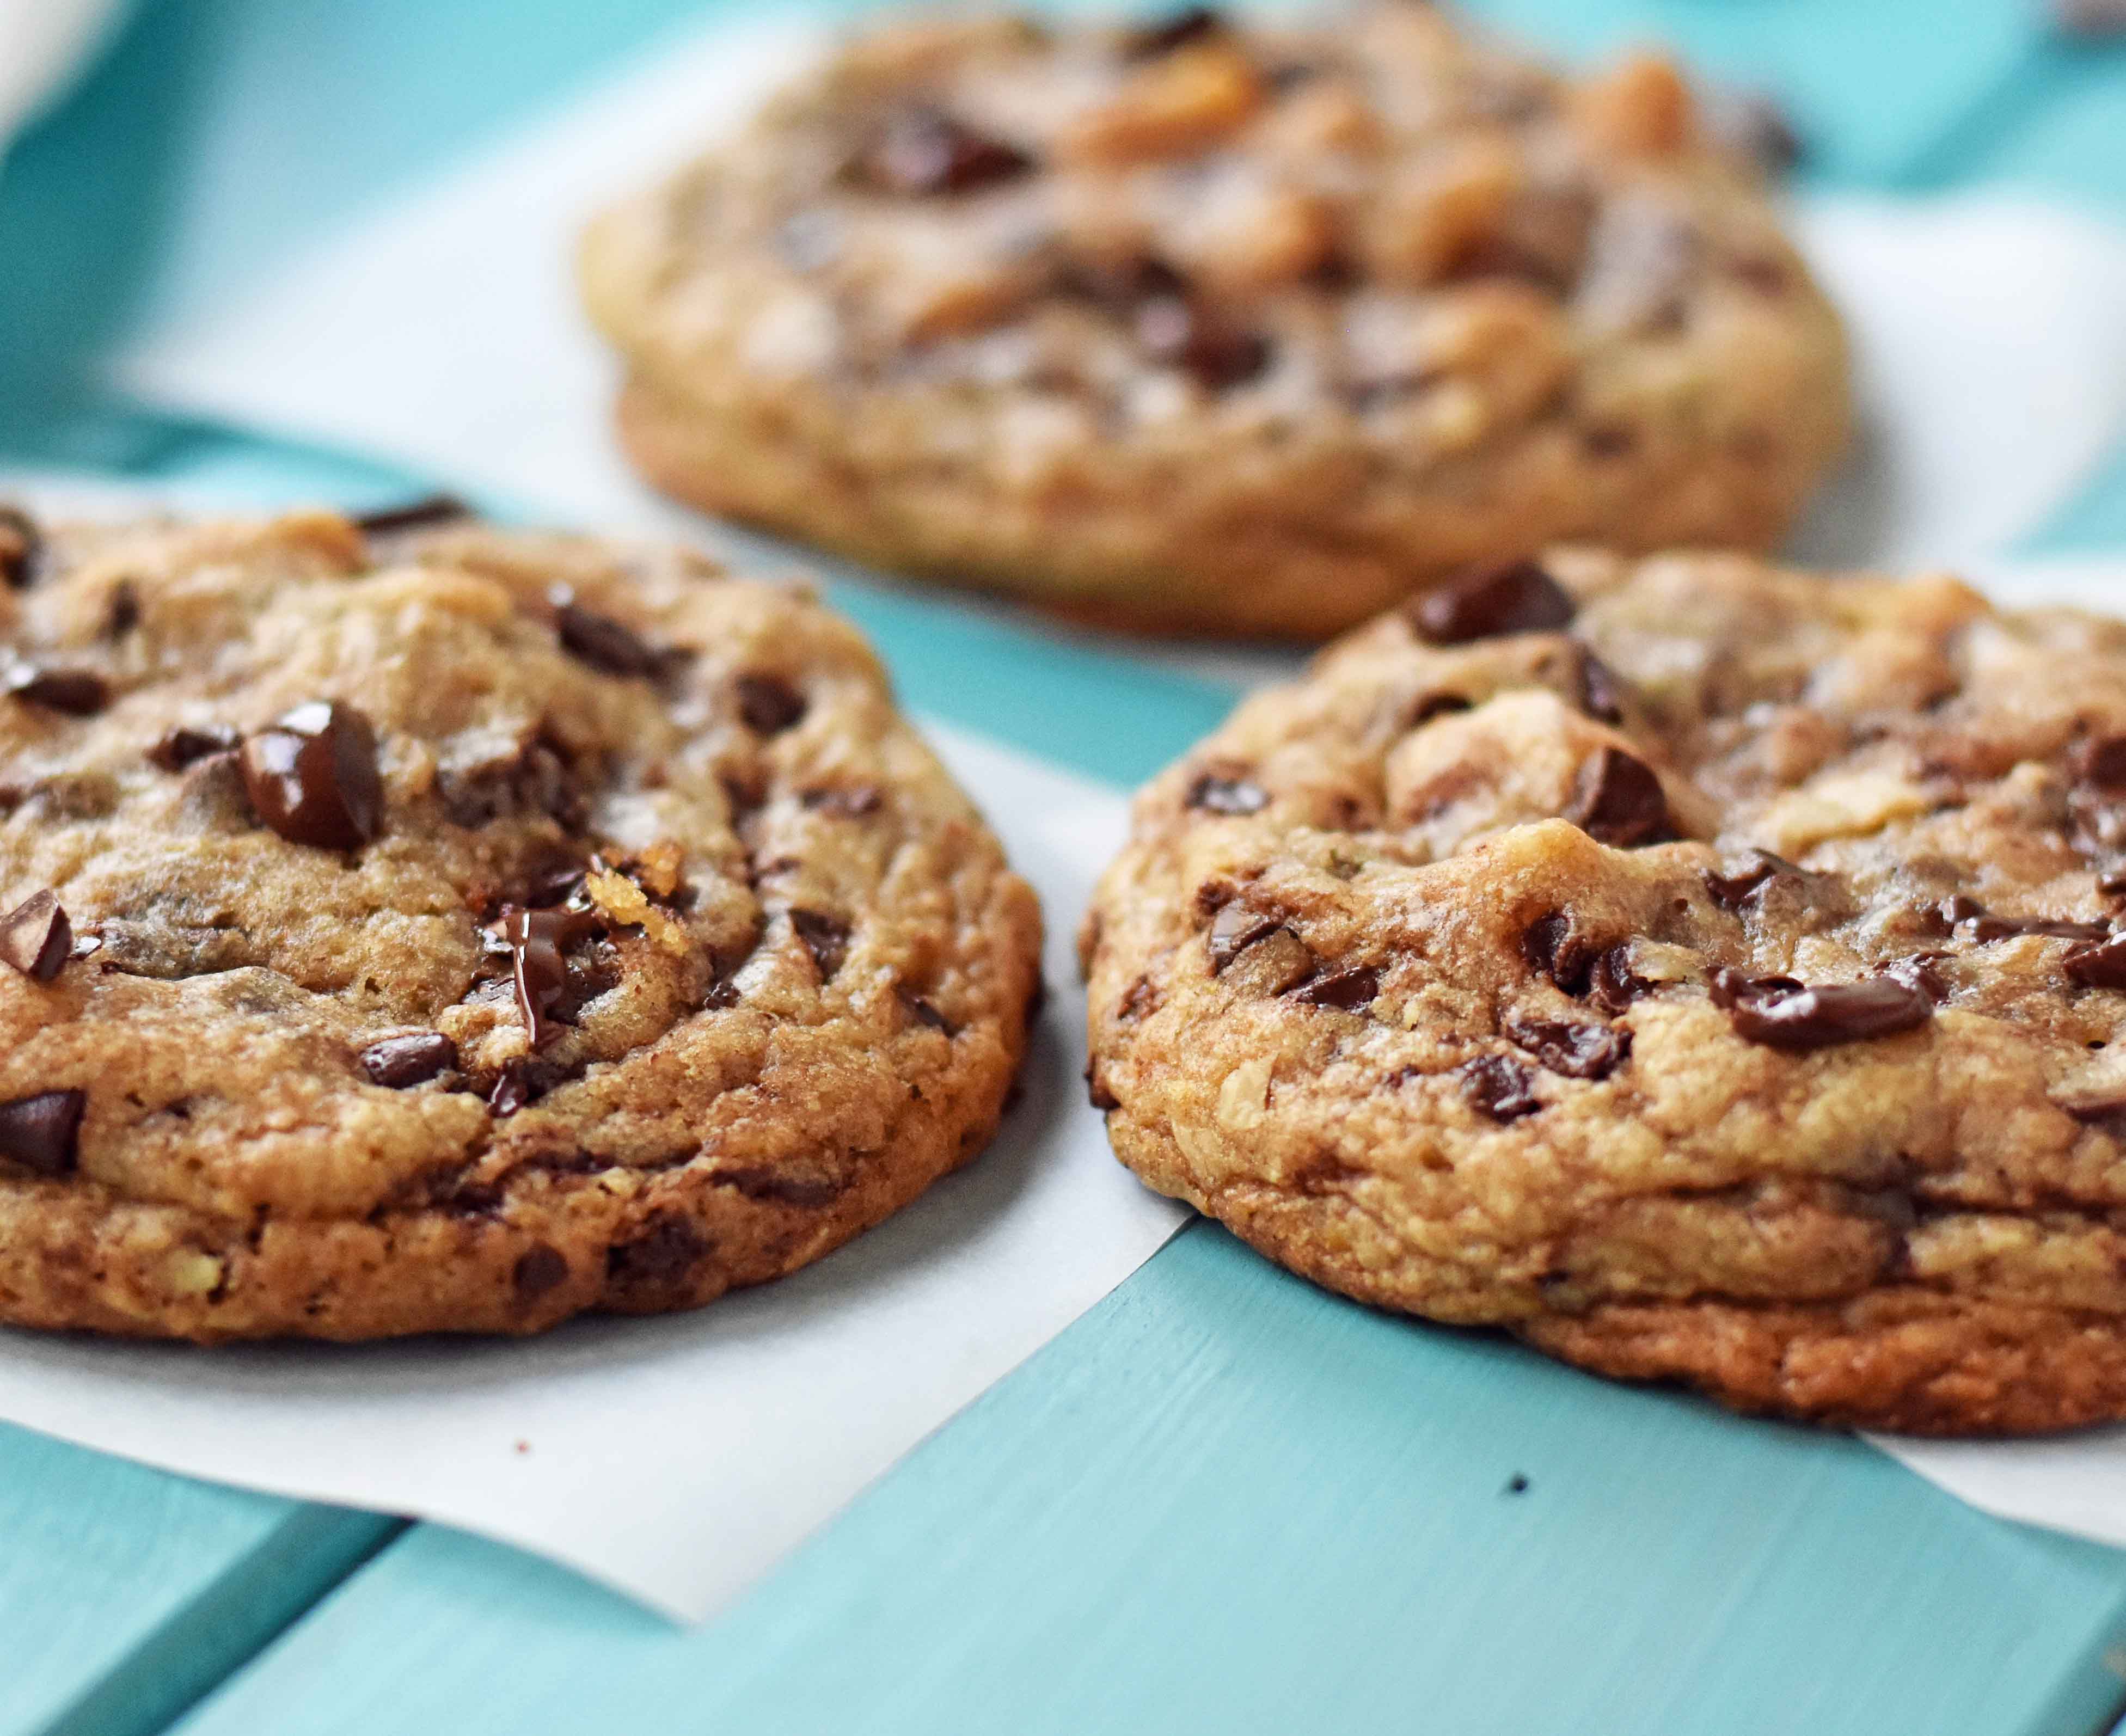 How To Make Chocolate Chip Cookies Chewy And Flat